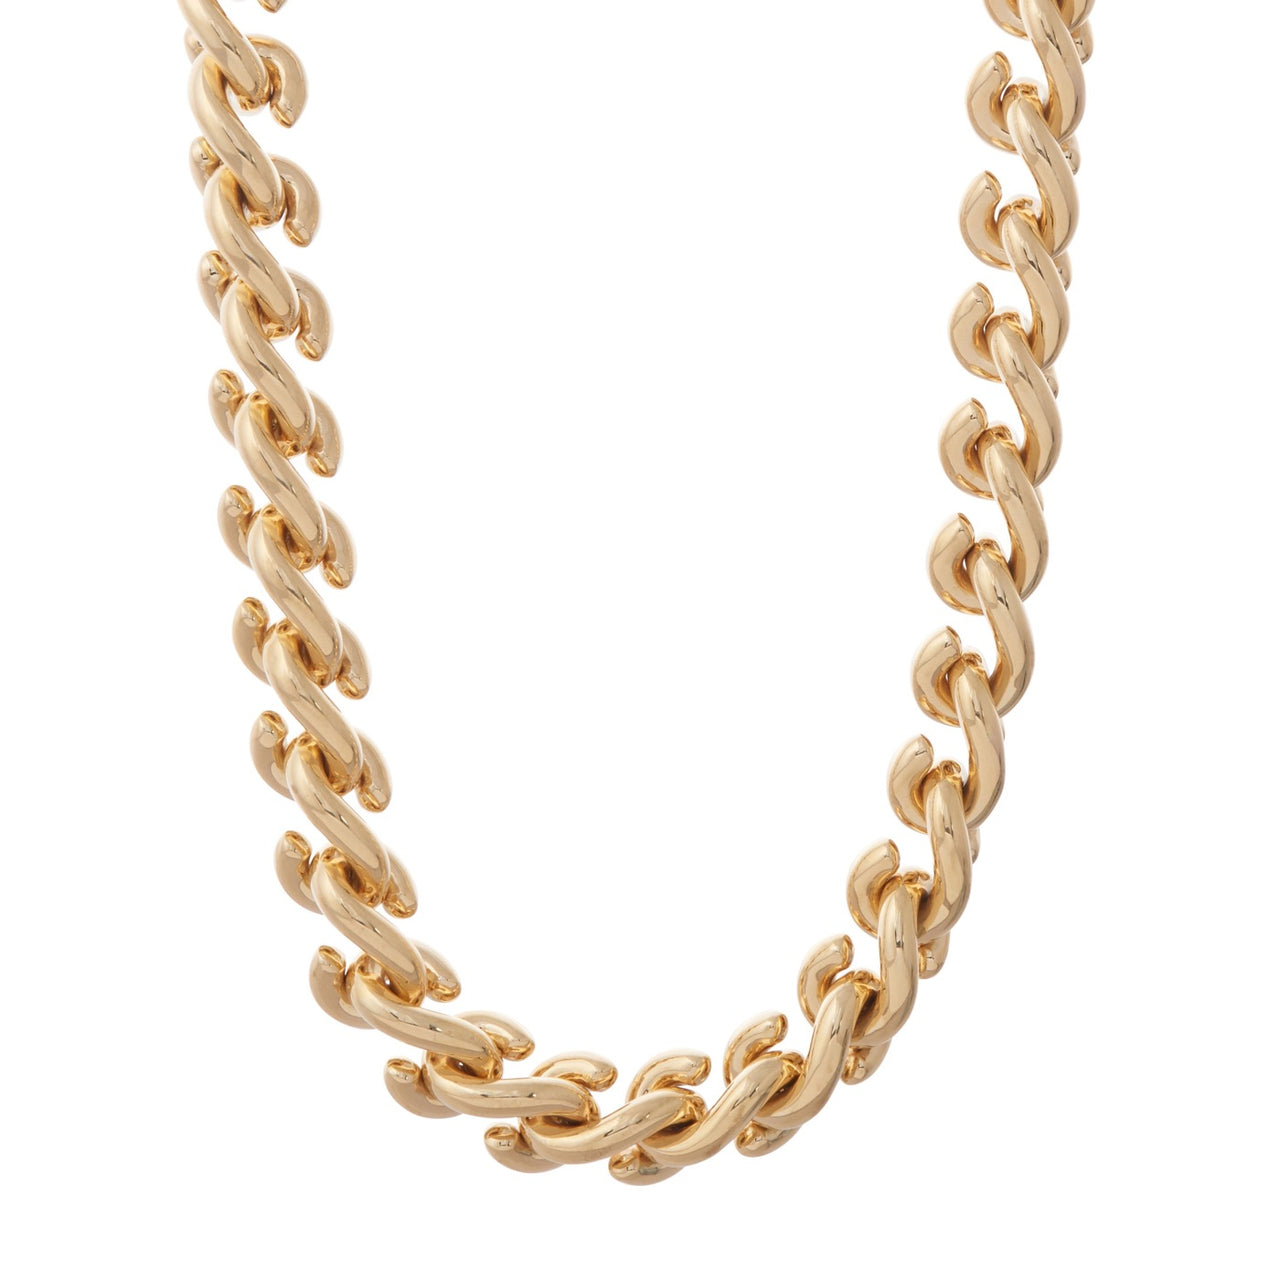 Slink Chain Necklace